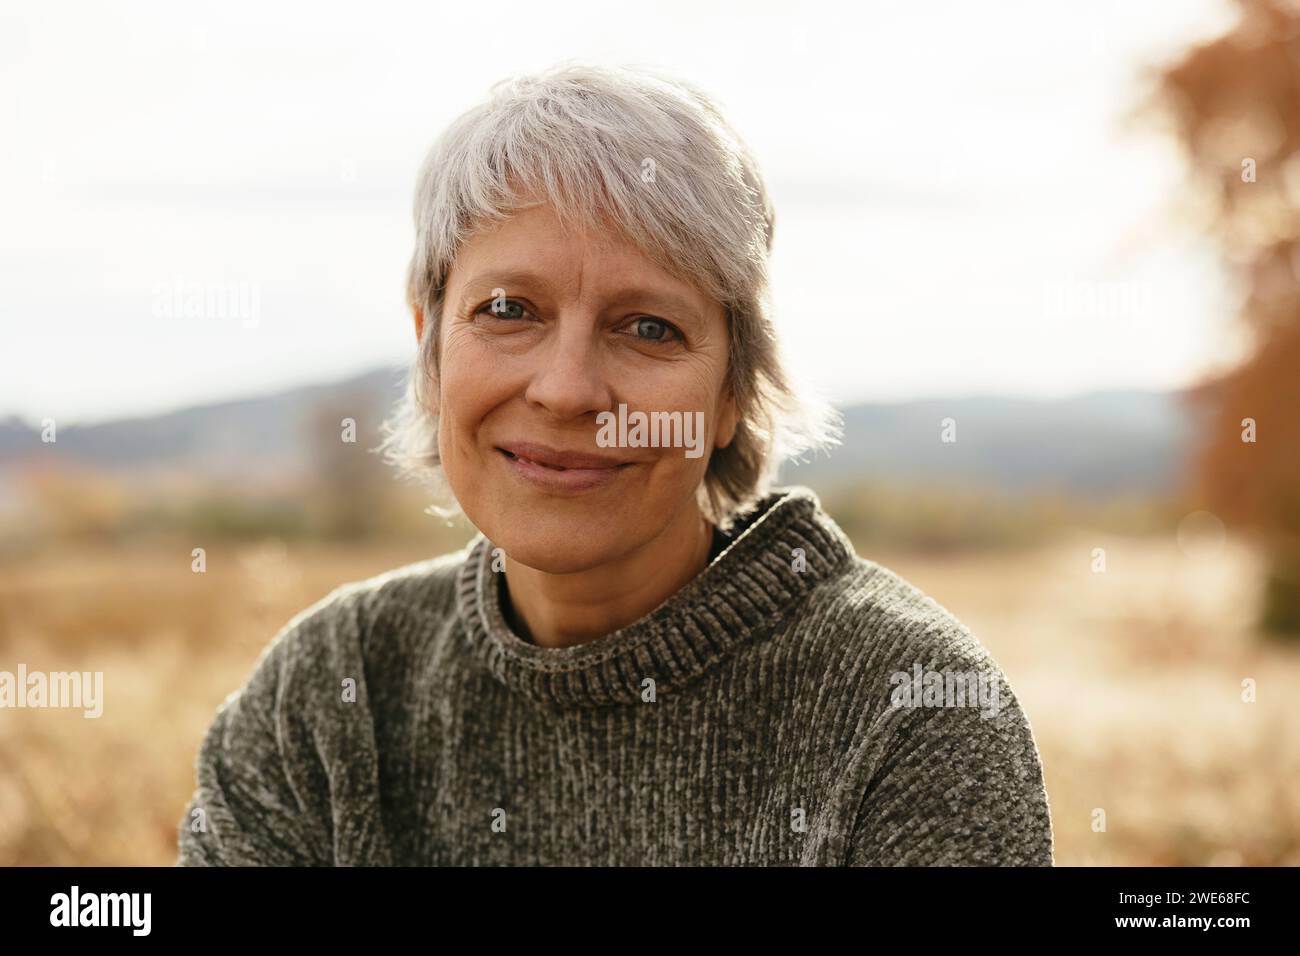 Smiling mature woman with gray hair under sky Stock Photo